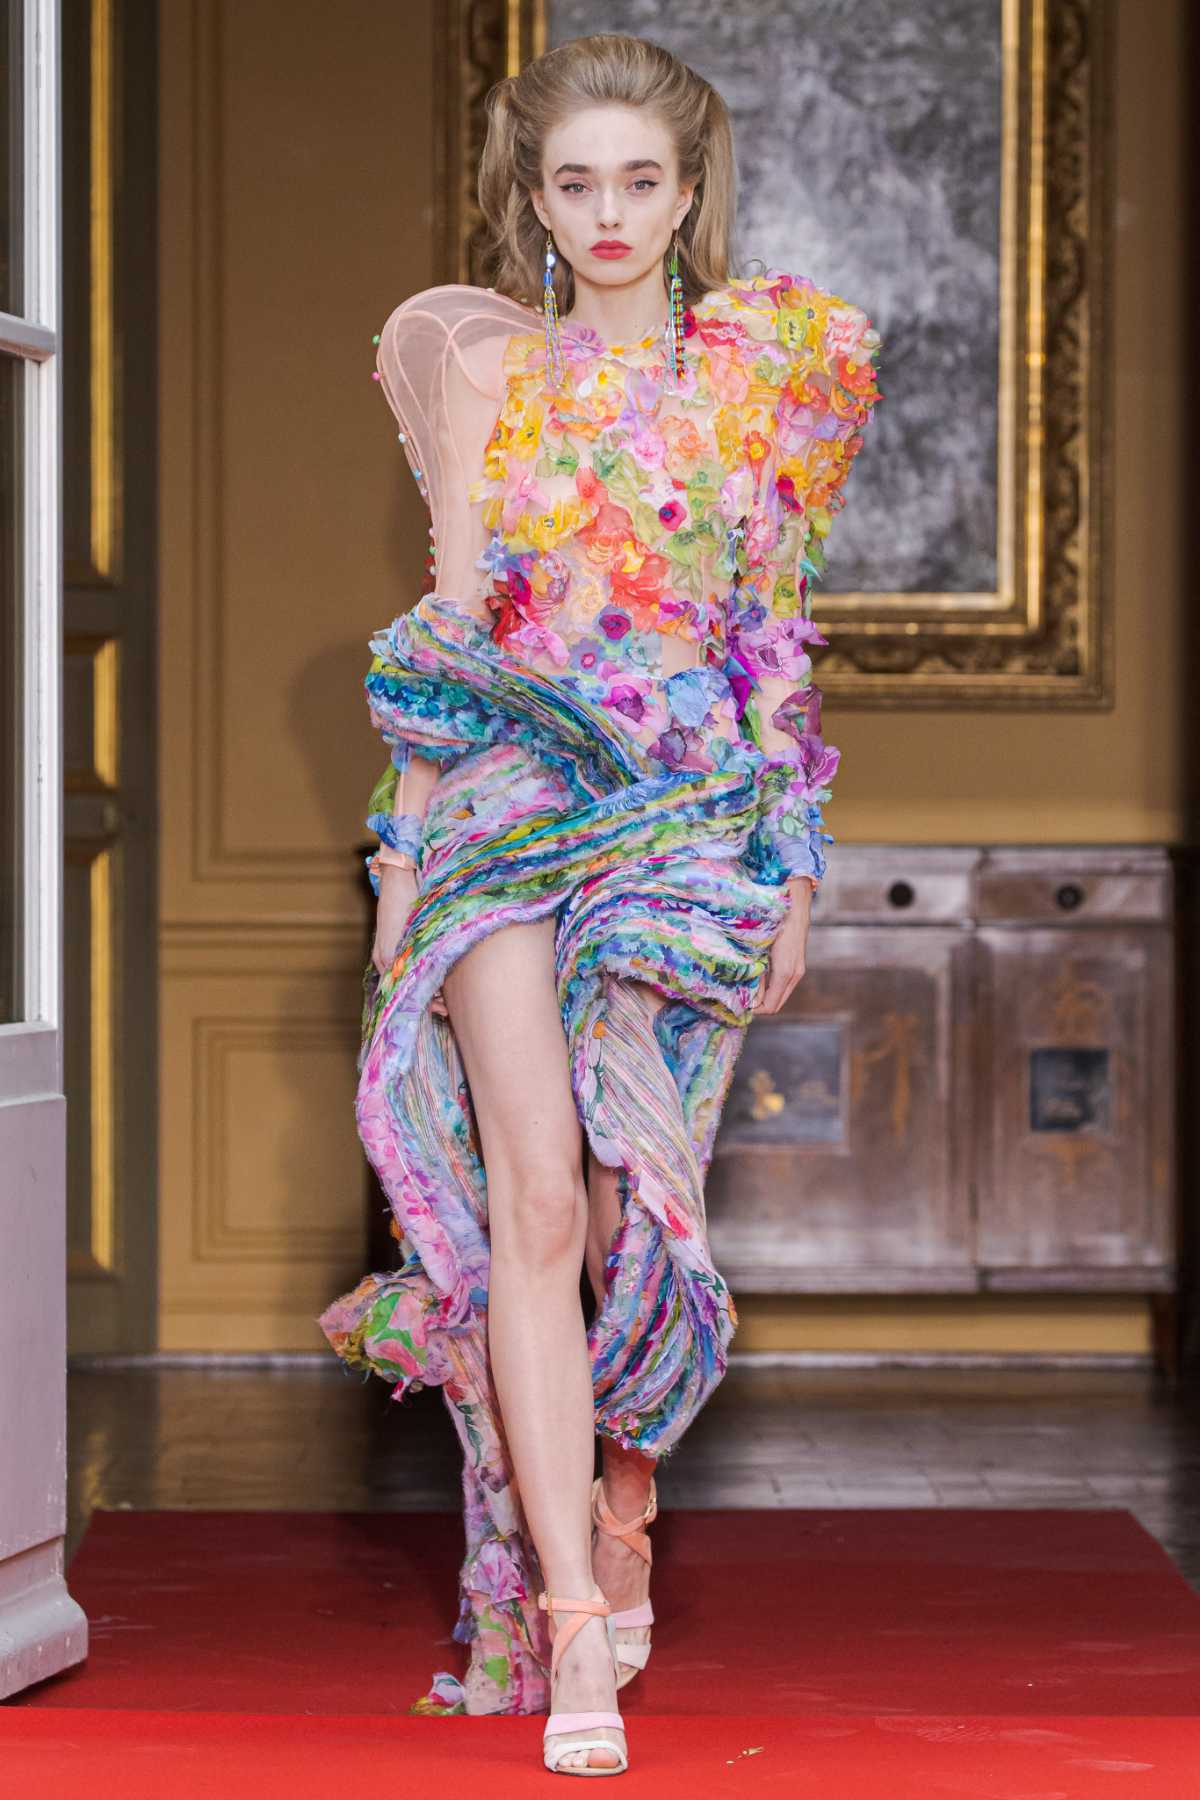 Ronald Van Der Kemp Presents Its New Haute Couture Fall 2022 Collection